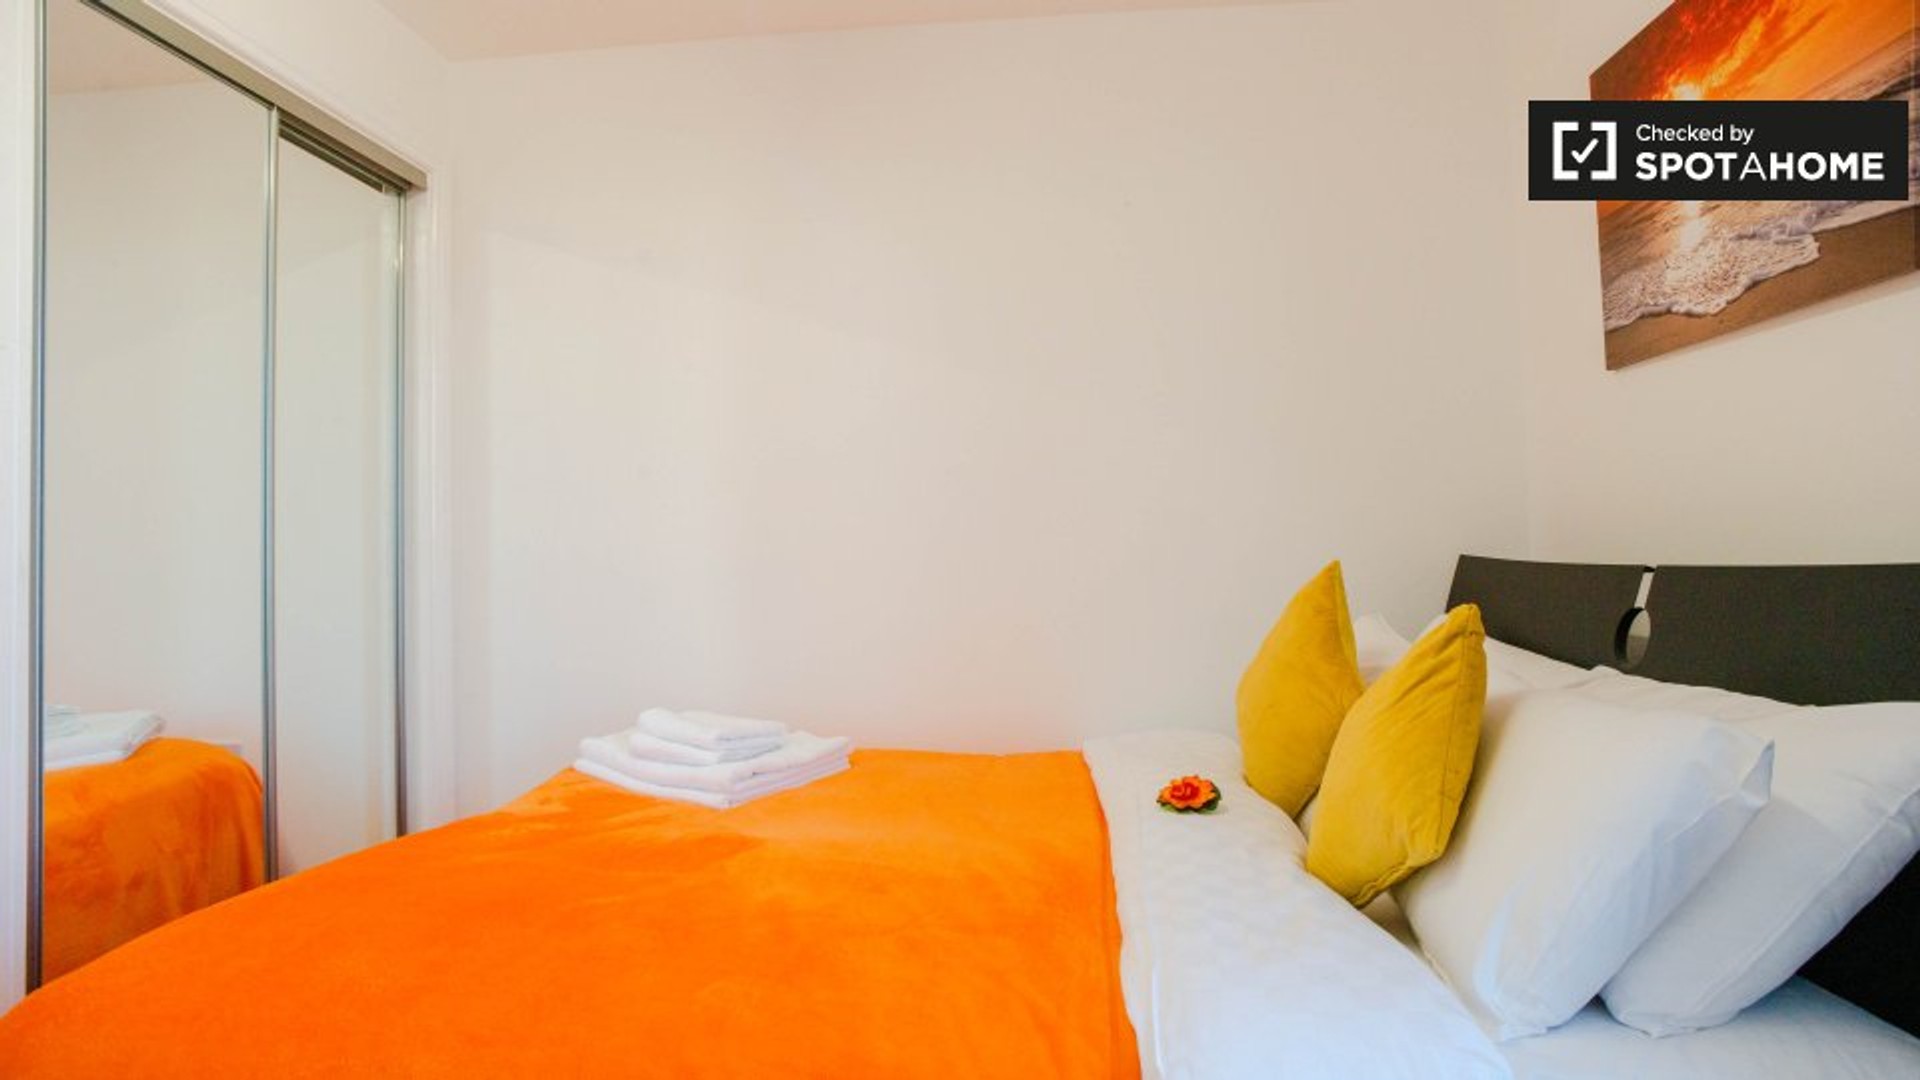 Accommodation in the centre of London